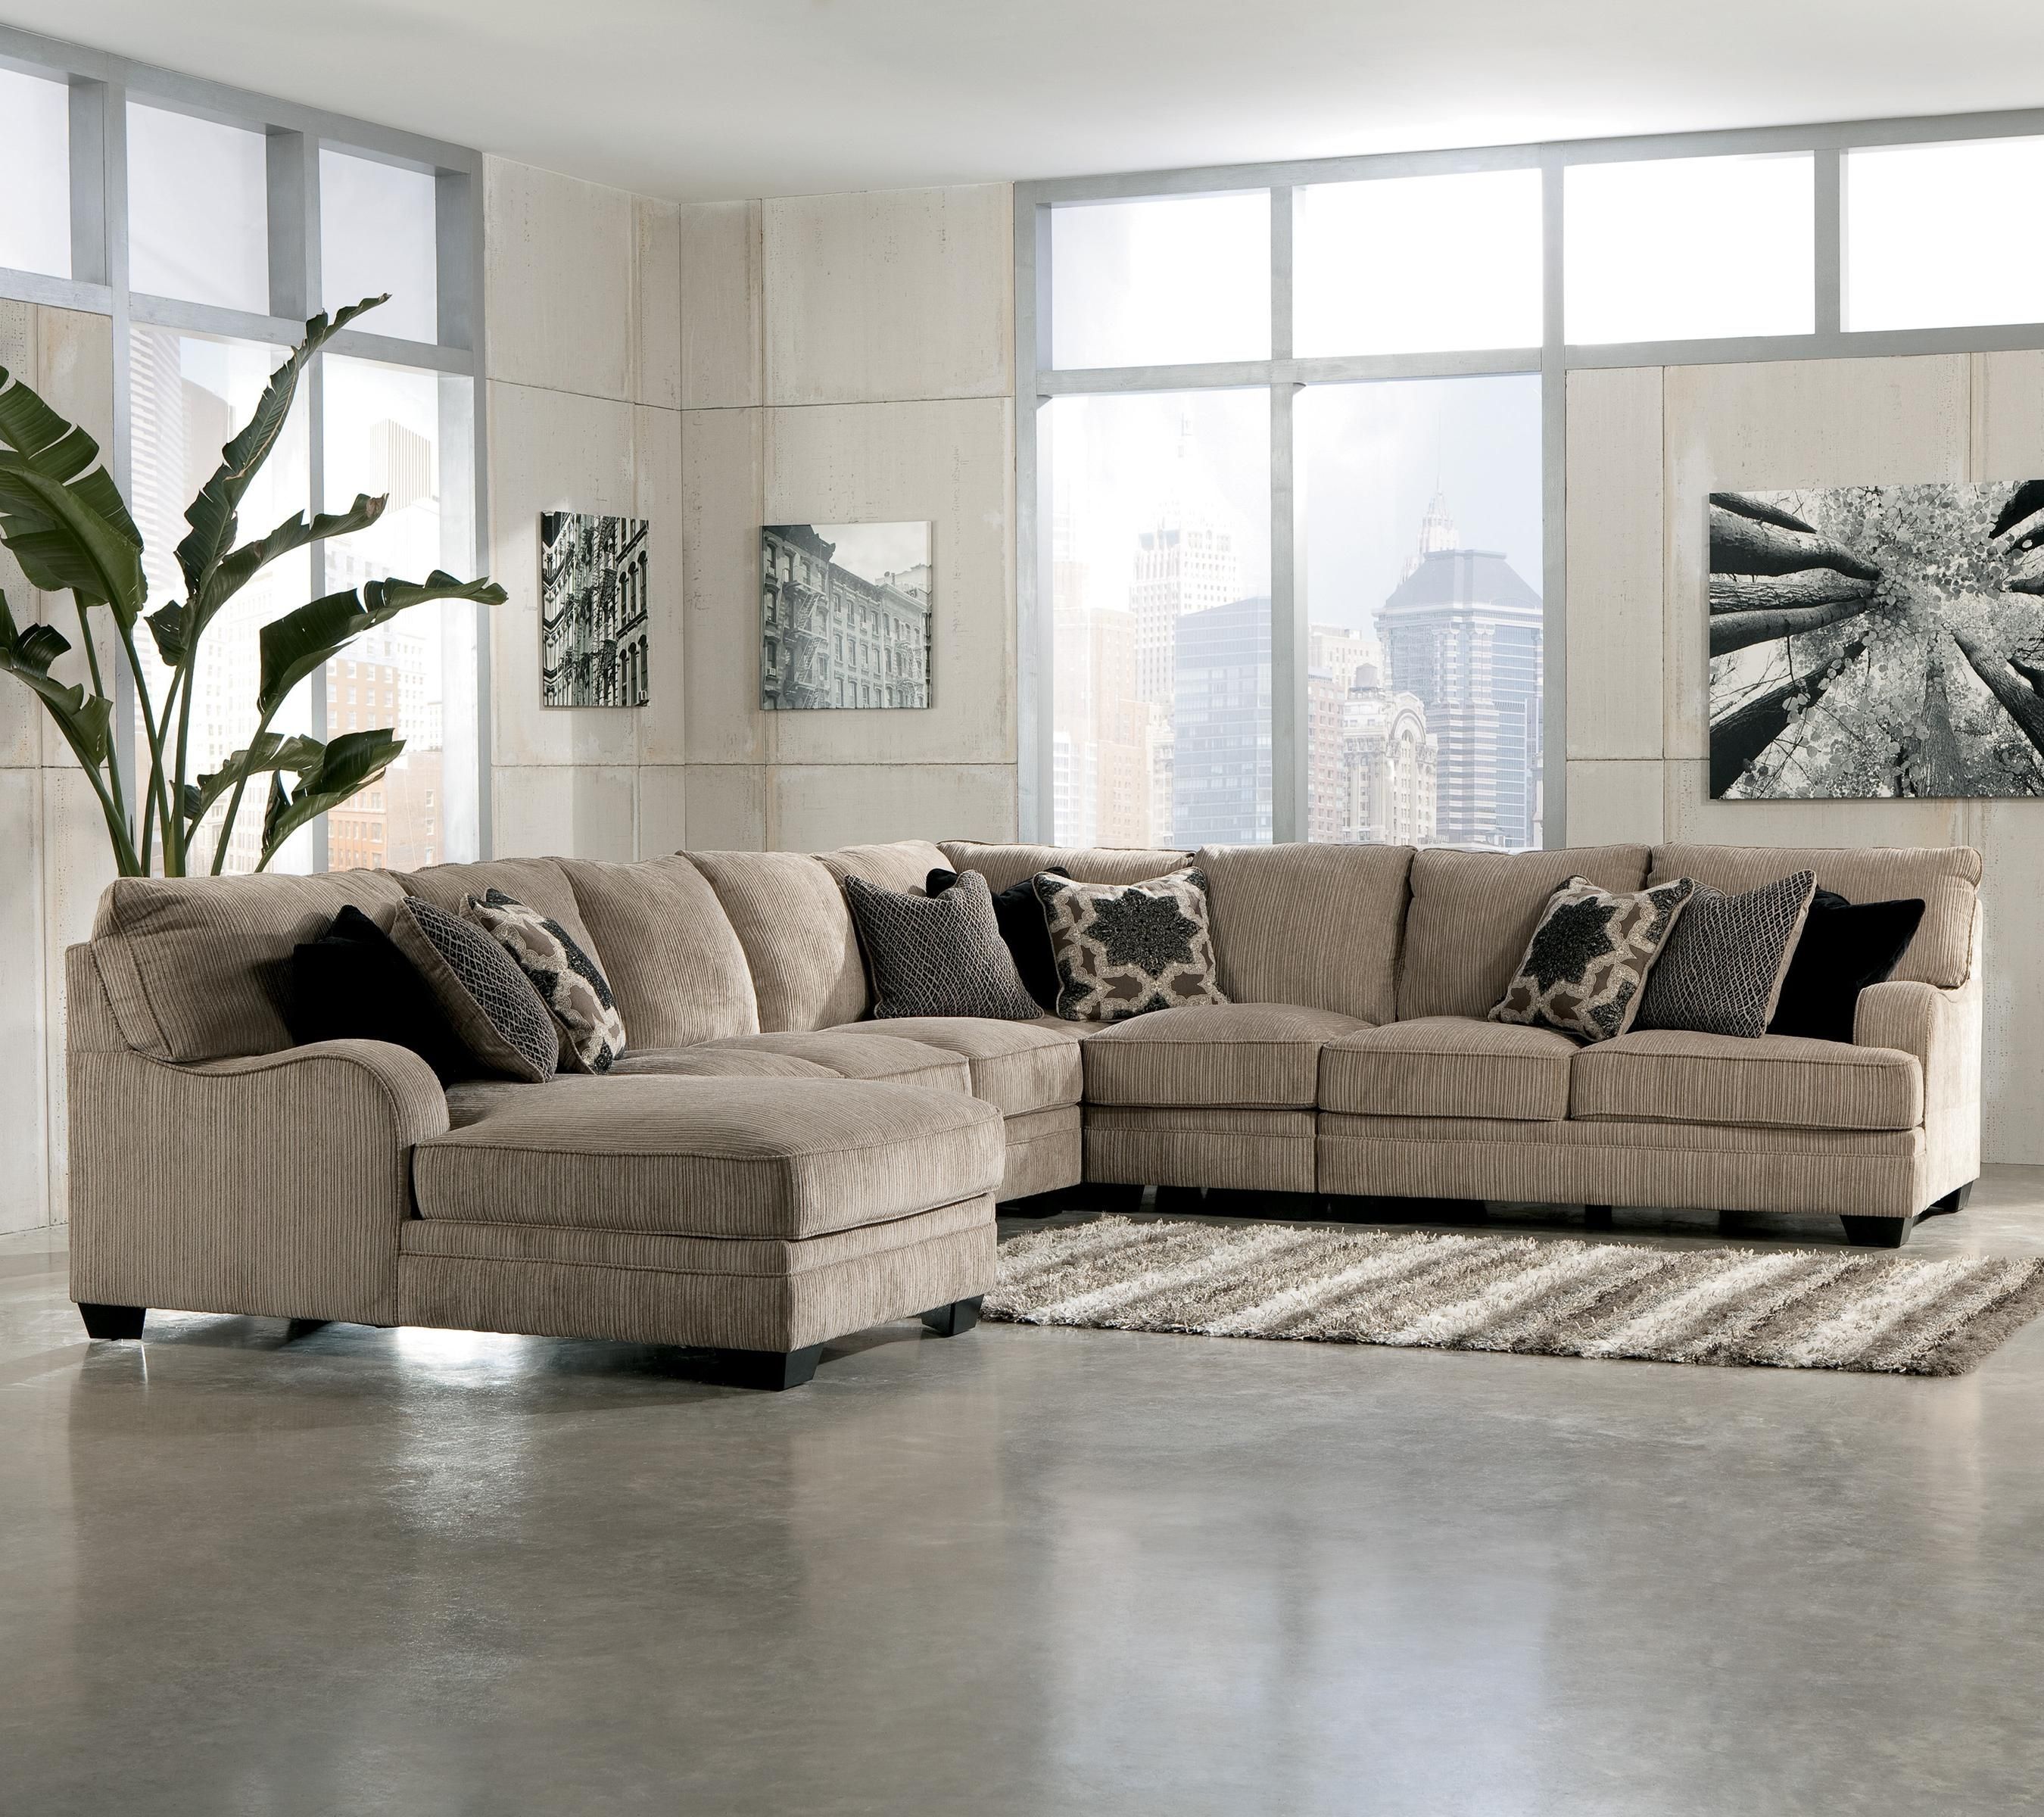 Featured Photo of The Best Jackson Ms Sectional Sofas